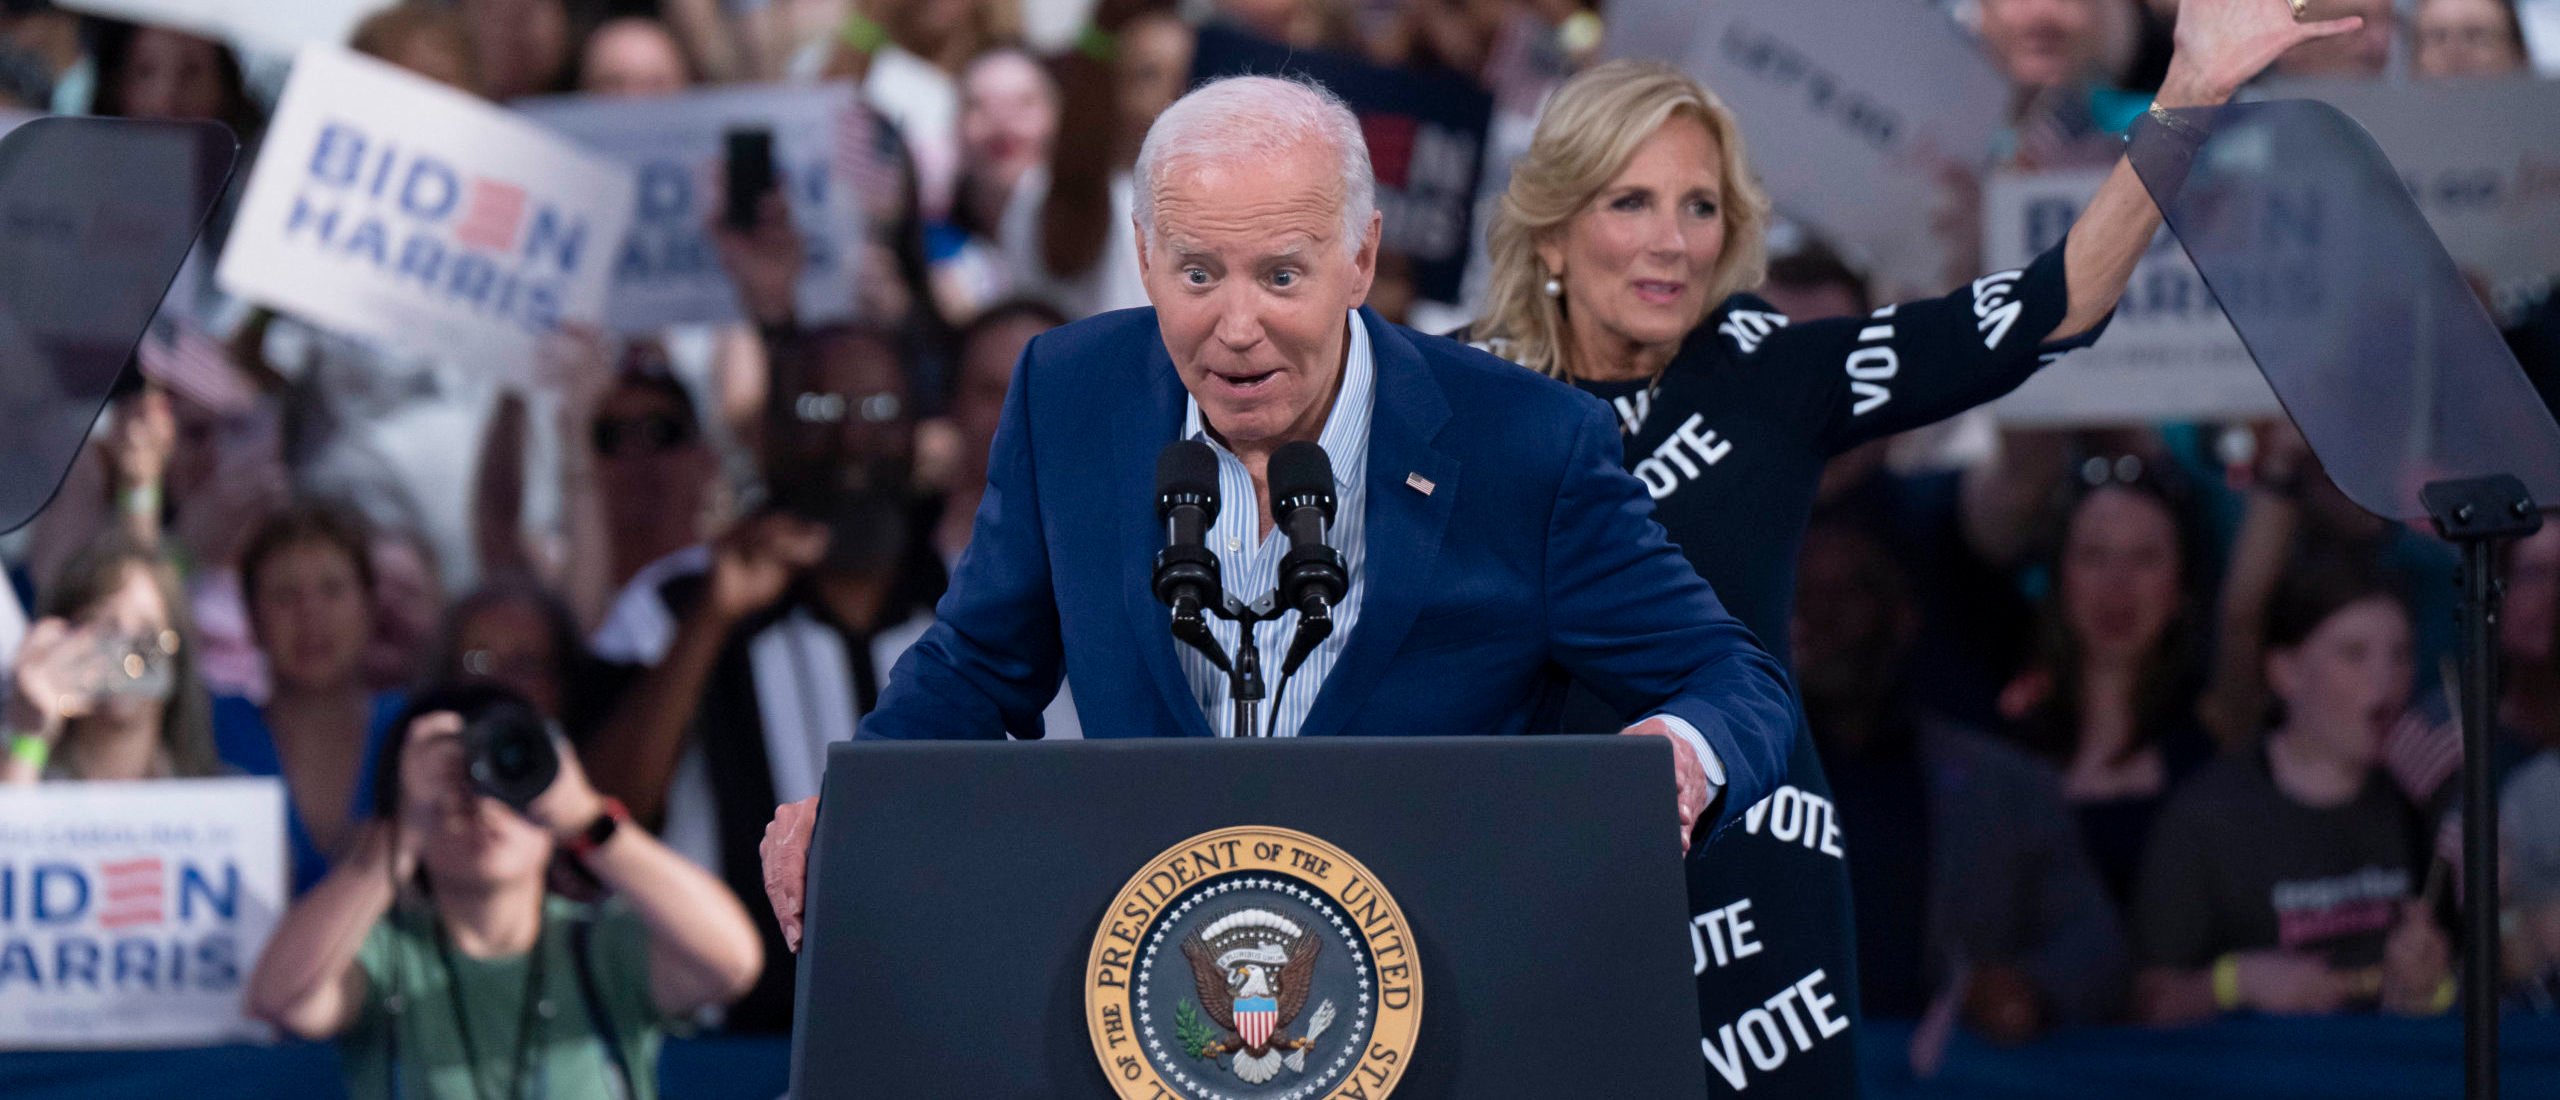 Reporters Say Biden Campaign Staff Tried To Stop Them From Interviewing Critical Voters